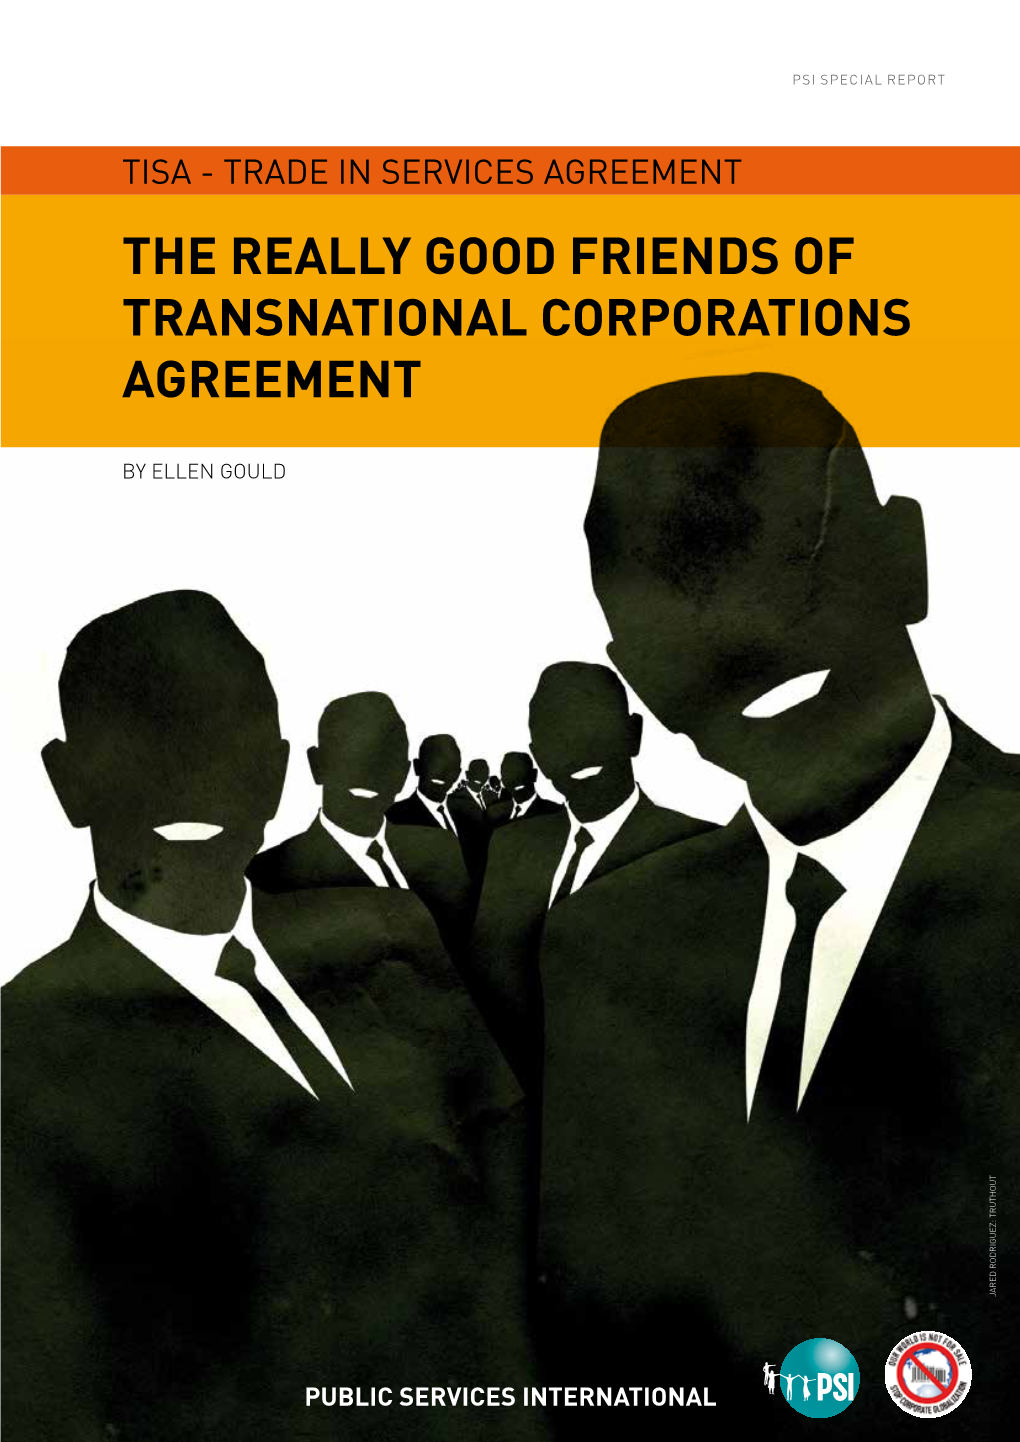 The Really Good Friends of Transnational Corporations Agreement